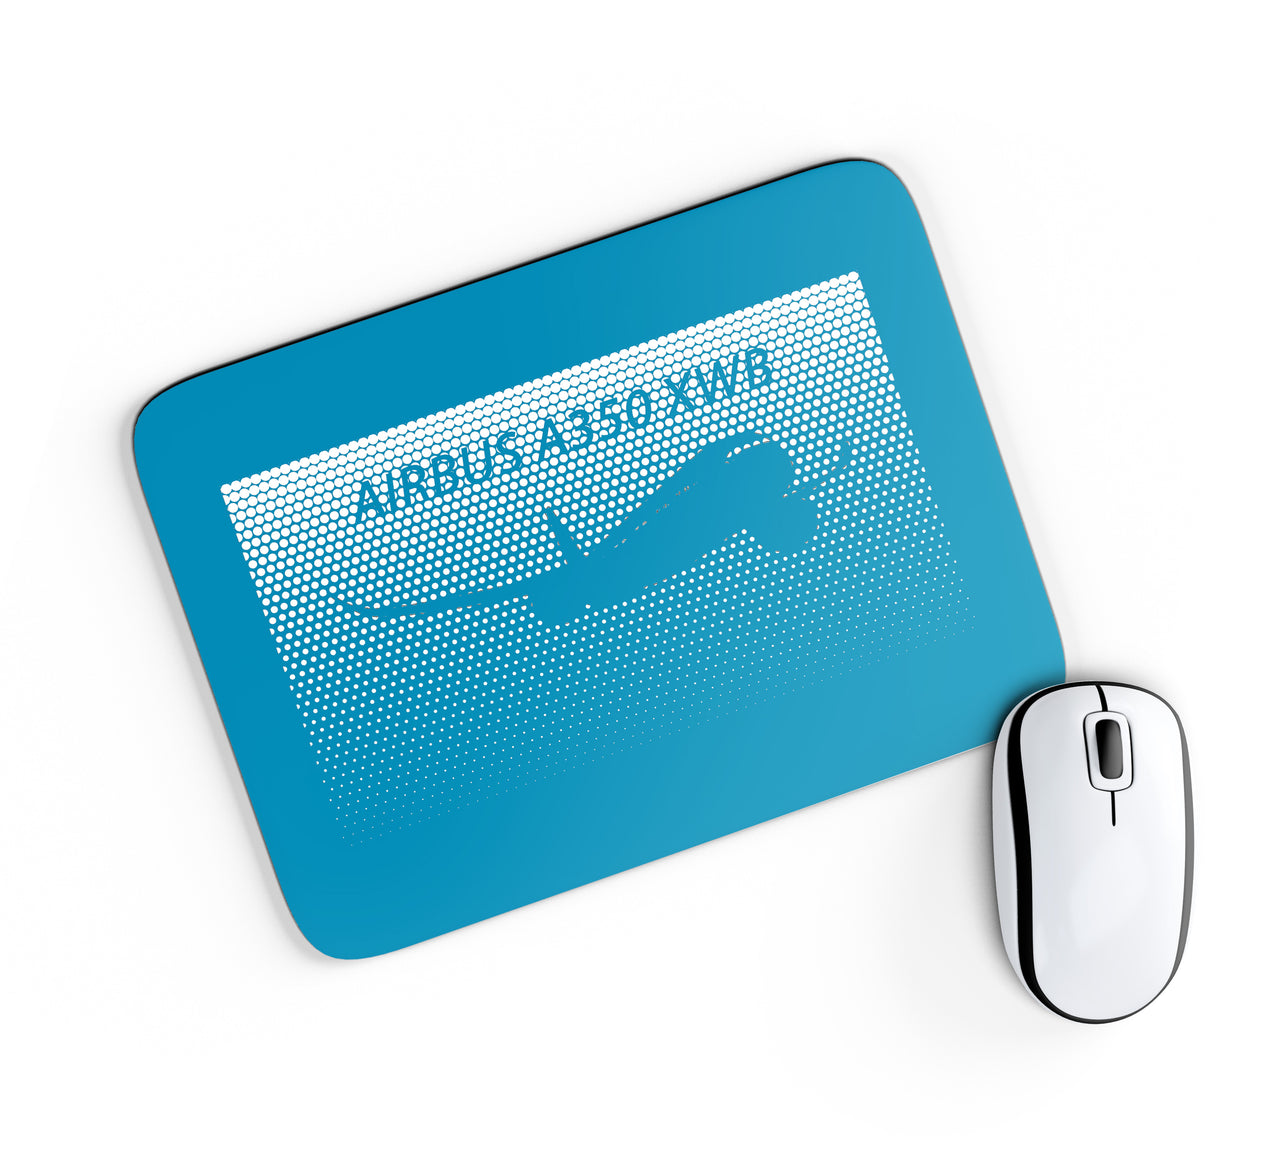 Airbus A350XWB & Dots Designed Mouse Pads